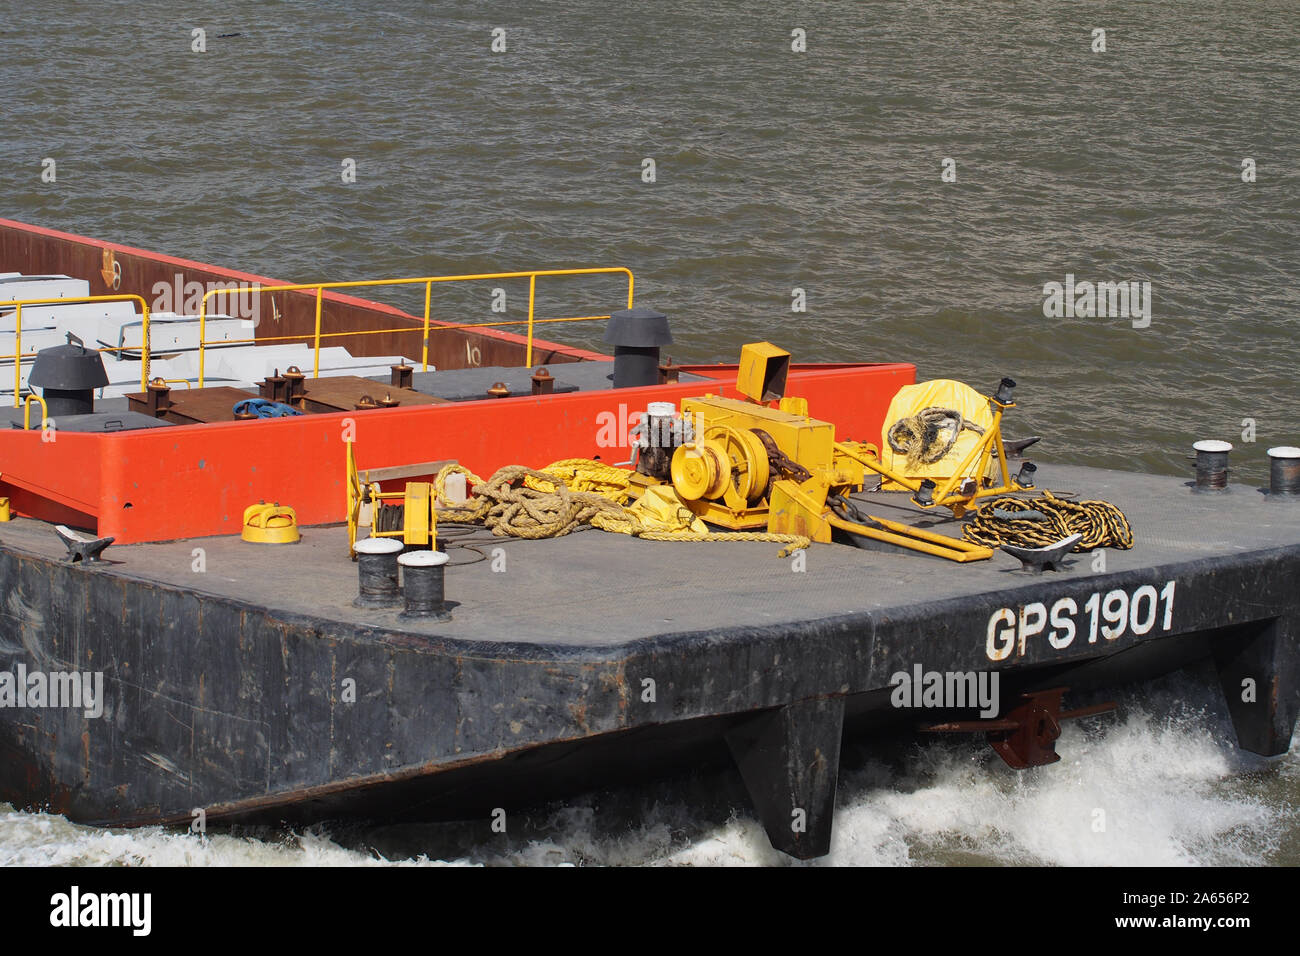 A close up view of the front of a working, moving barge on the River Thames at Westminster with ropes, pulleys and general gear on board Stock Photo